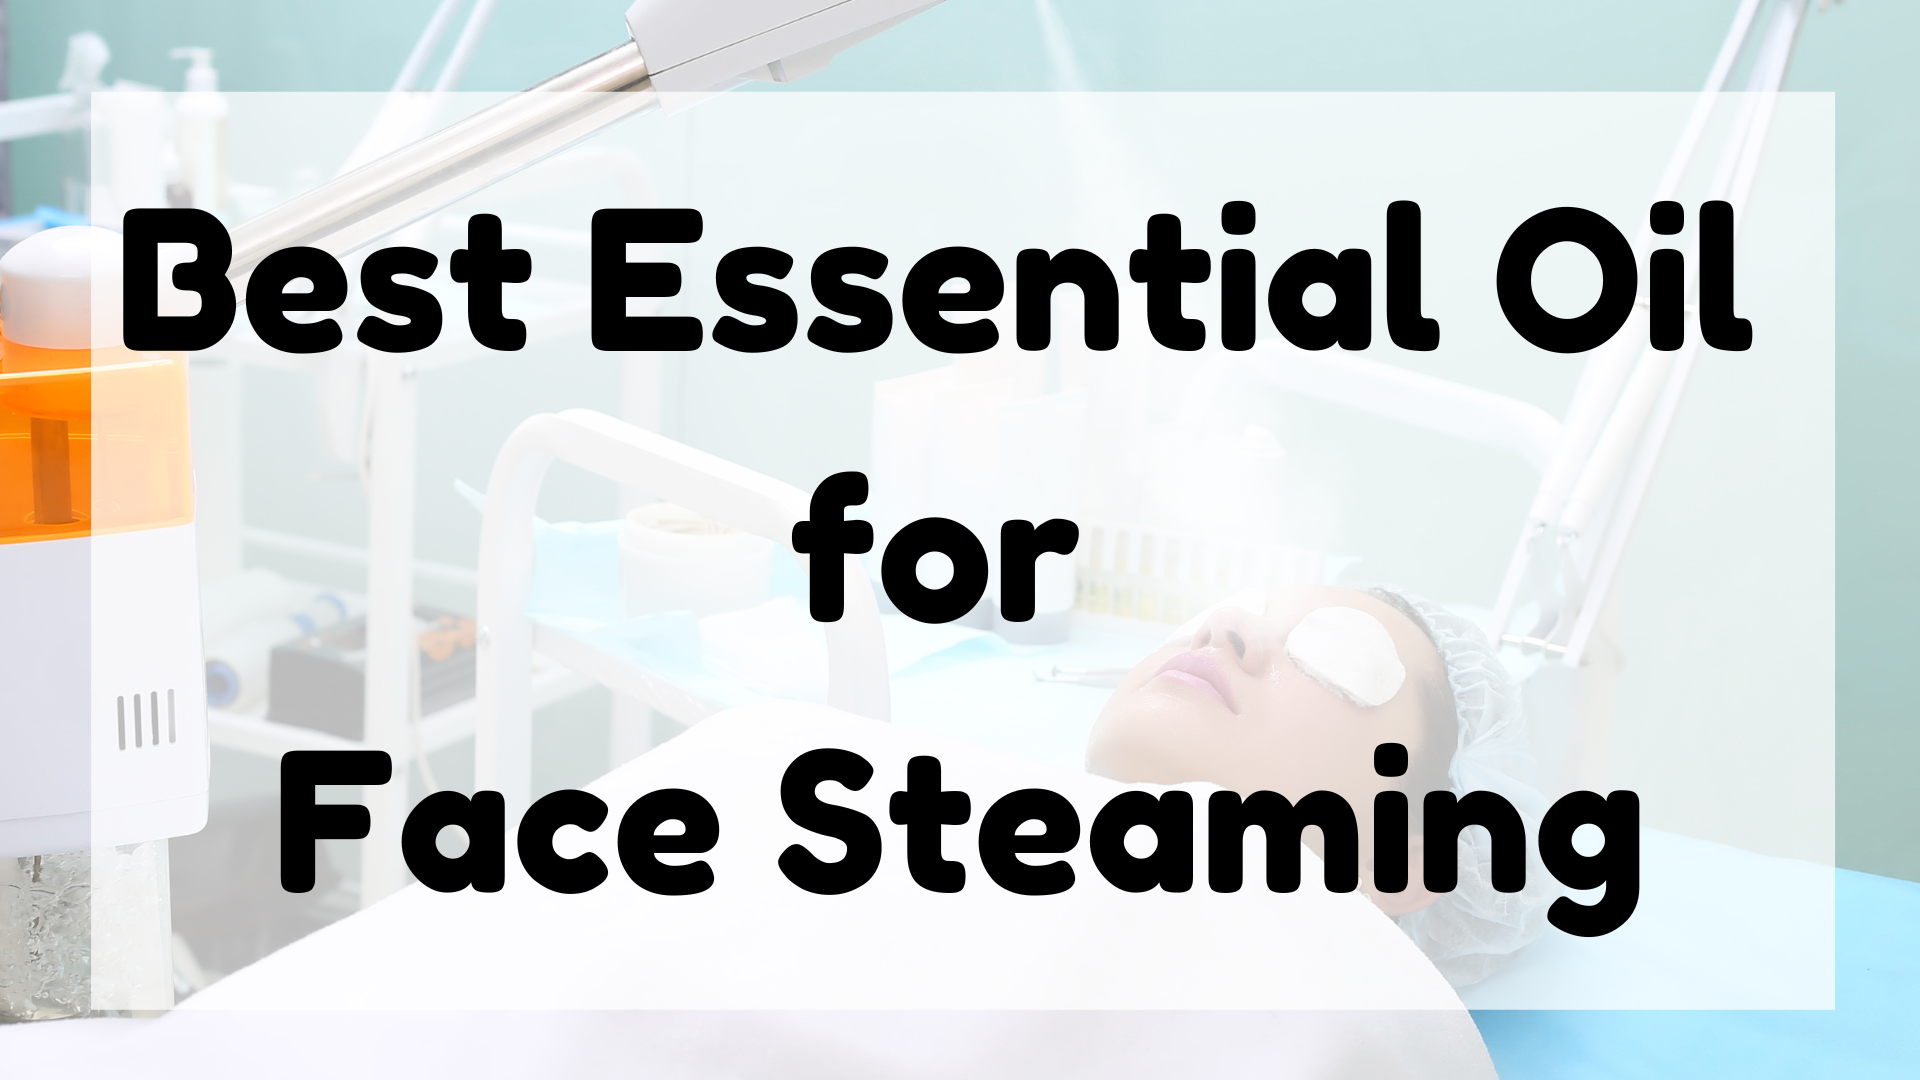 Best Essential Oil for Face Steaming featured image